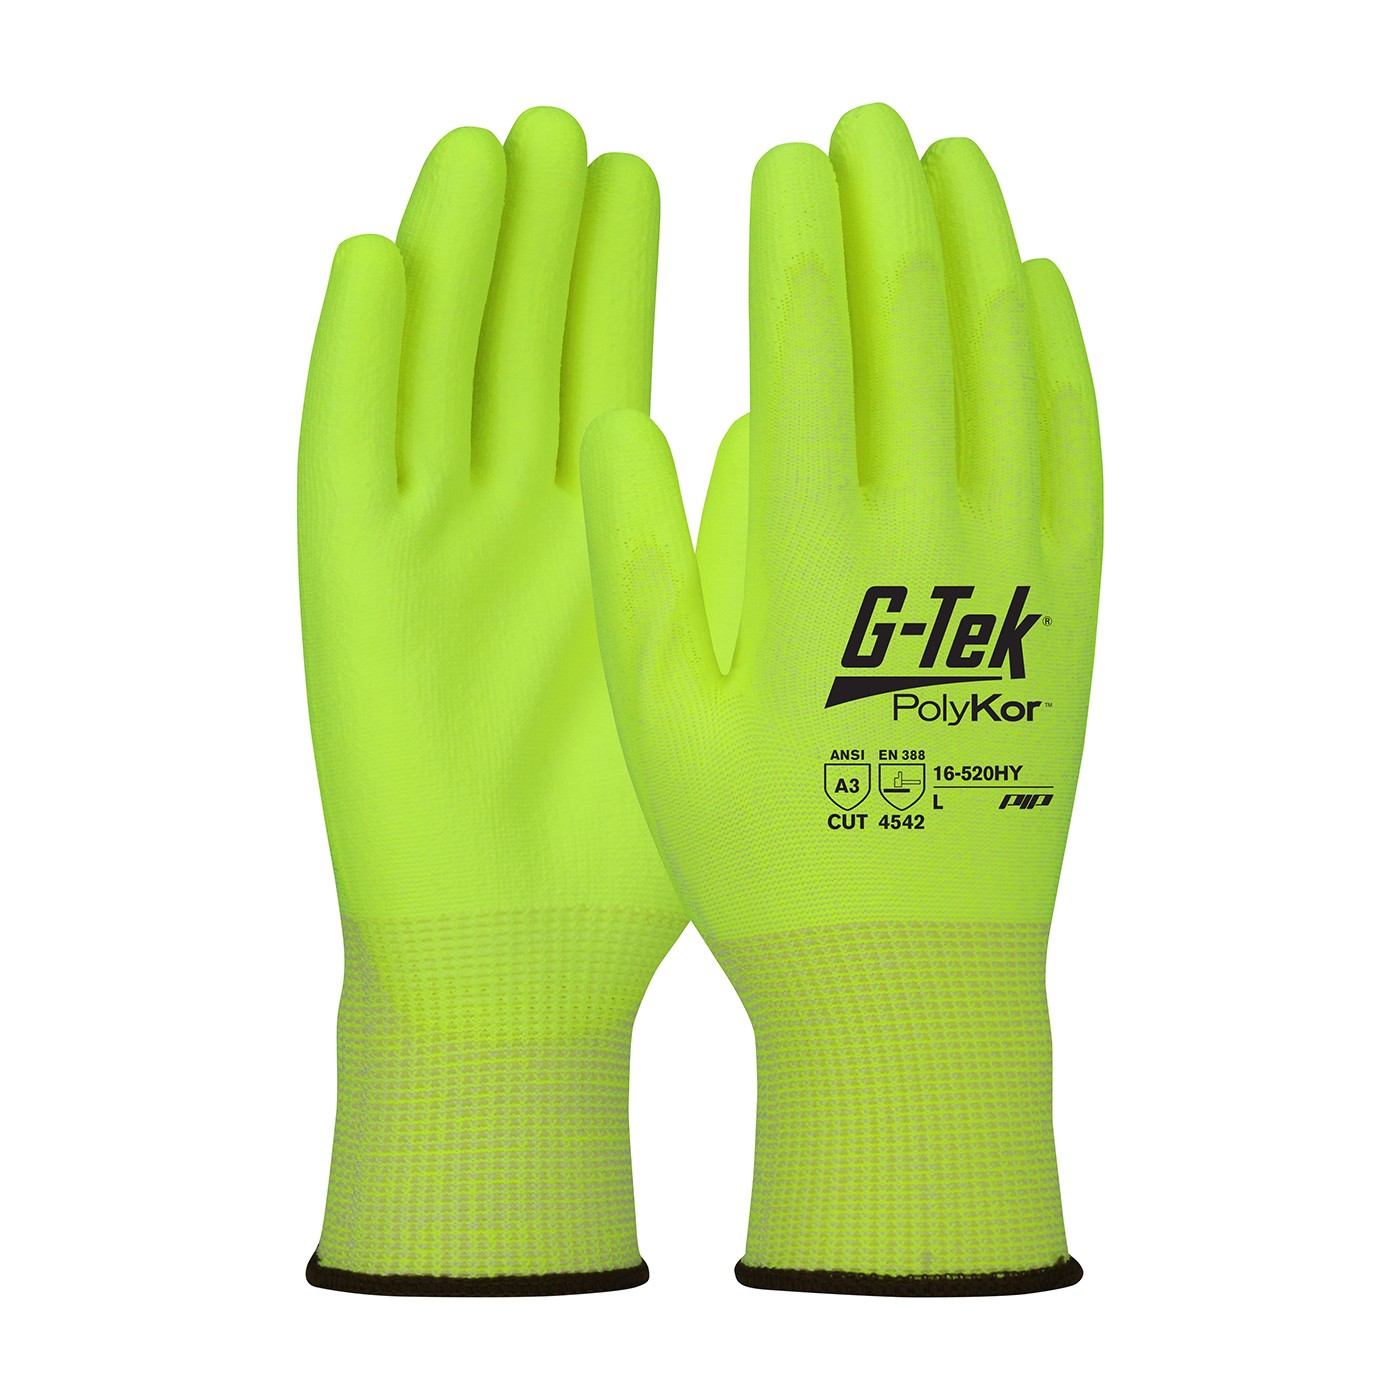 G-Tek® PolyKor® Hi-Vis Seamless Knit PolyKor® Blended Glove with Polyurethane Coated Smooth Grip on Palm & Fingers  (#16-520HY)